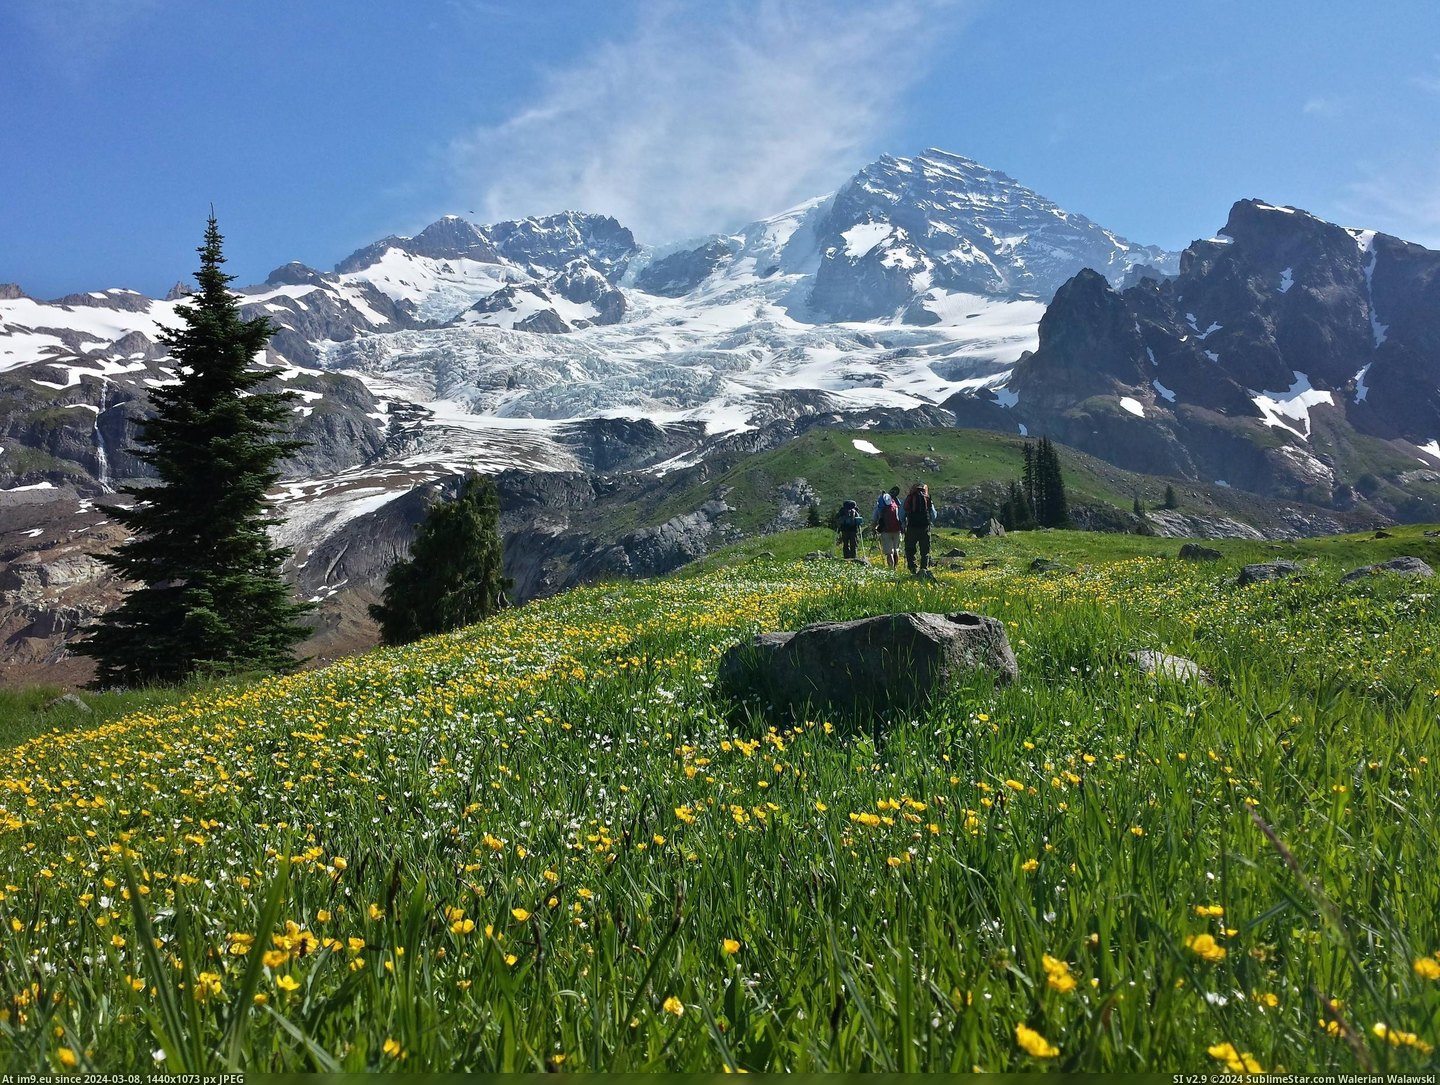 #Shot #Experience #Classic #Wonderland #Ridge #Ranier #Trail #Gotta #Emerald [Earthporn] Classic shot of Mt. Ranier from Emerald Ridge on the Wonderland Trail. You gotta be there to really experience it. [ Pic. (Bild von album My r/EARTHPORN favs))